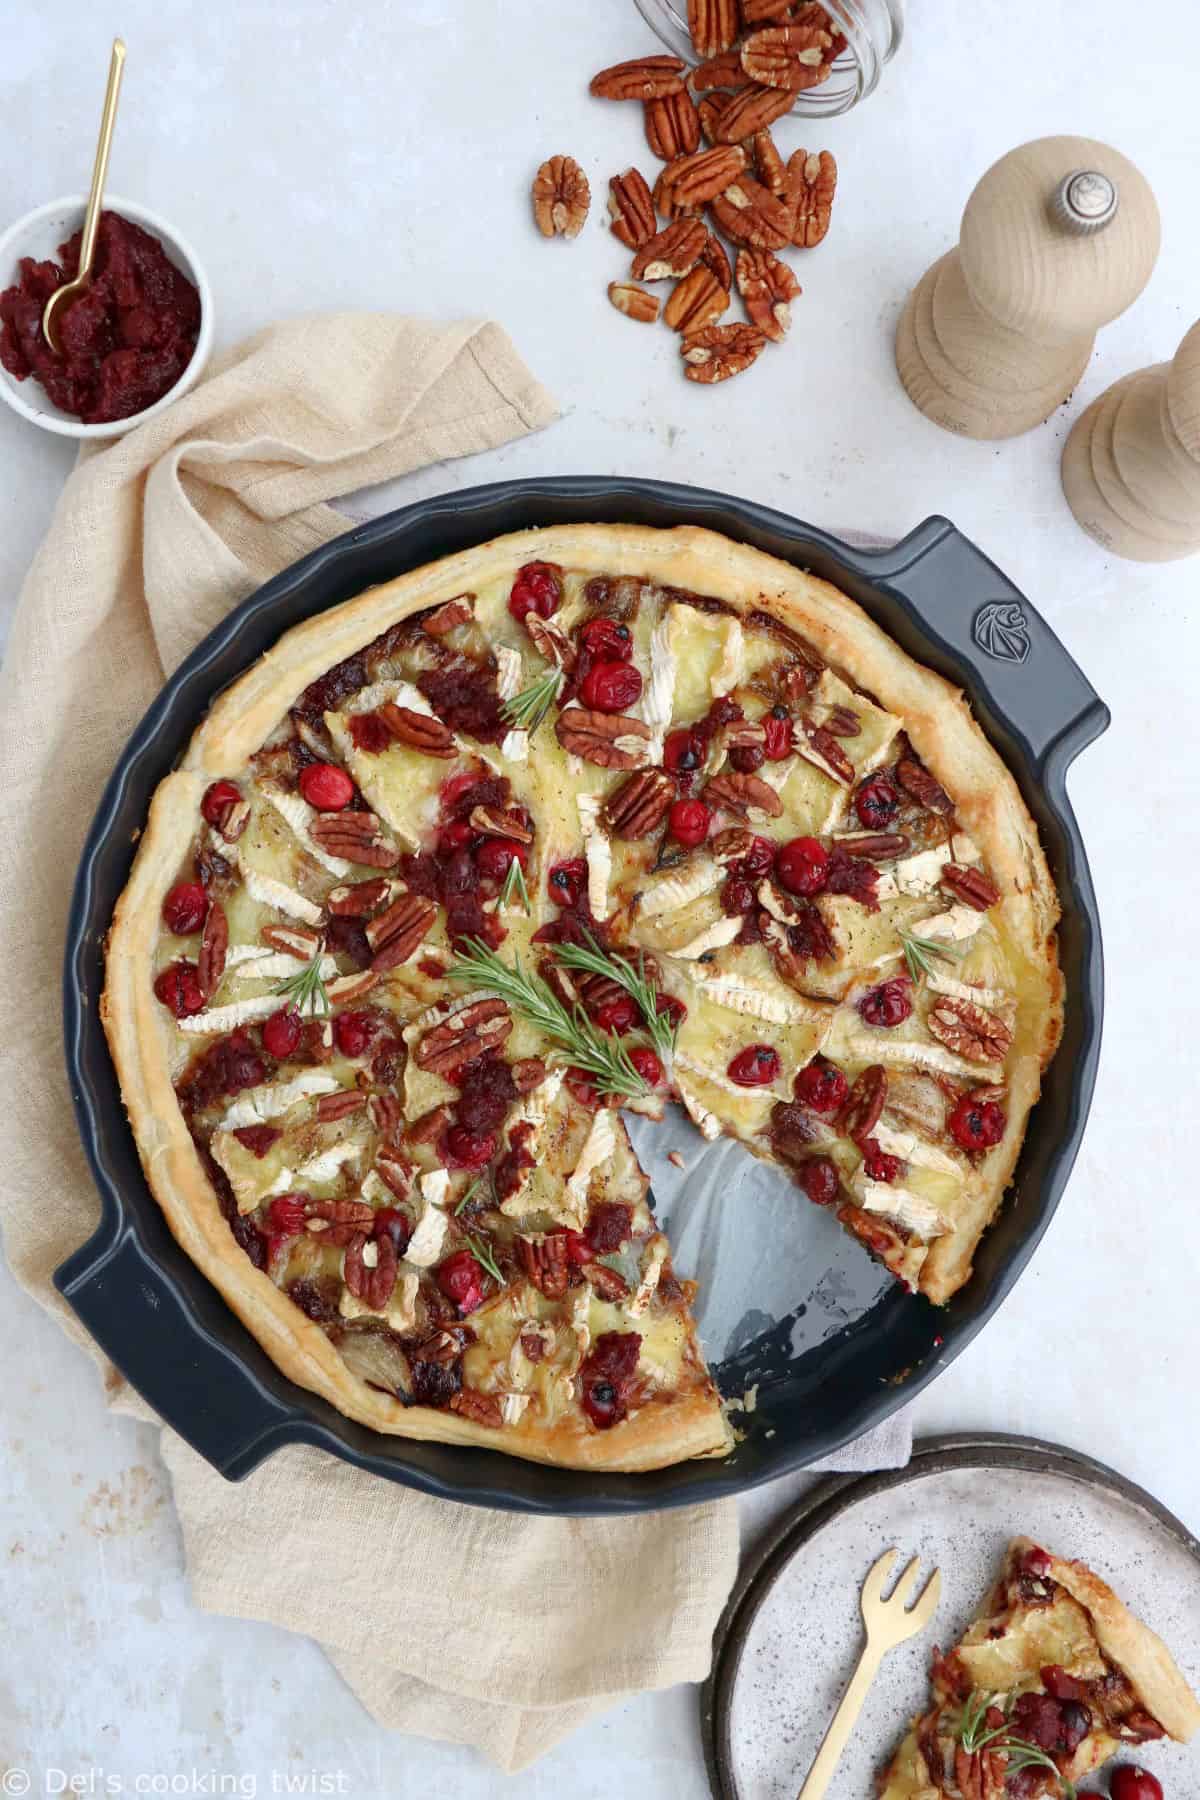 This creamy mushroom pasta bake is a cozy vegetarian comforting casserole, just perfect for a cozy weeknight dinner.This cranberry brie tart prepared with a puff pastry makes for a lovely festive starter for the holidays. It's warm, comforting, and loaded with melting cheese and tangy cranberries.